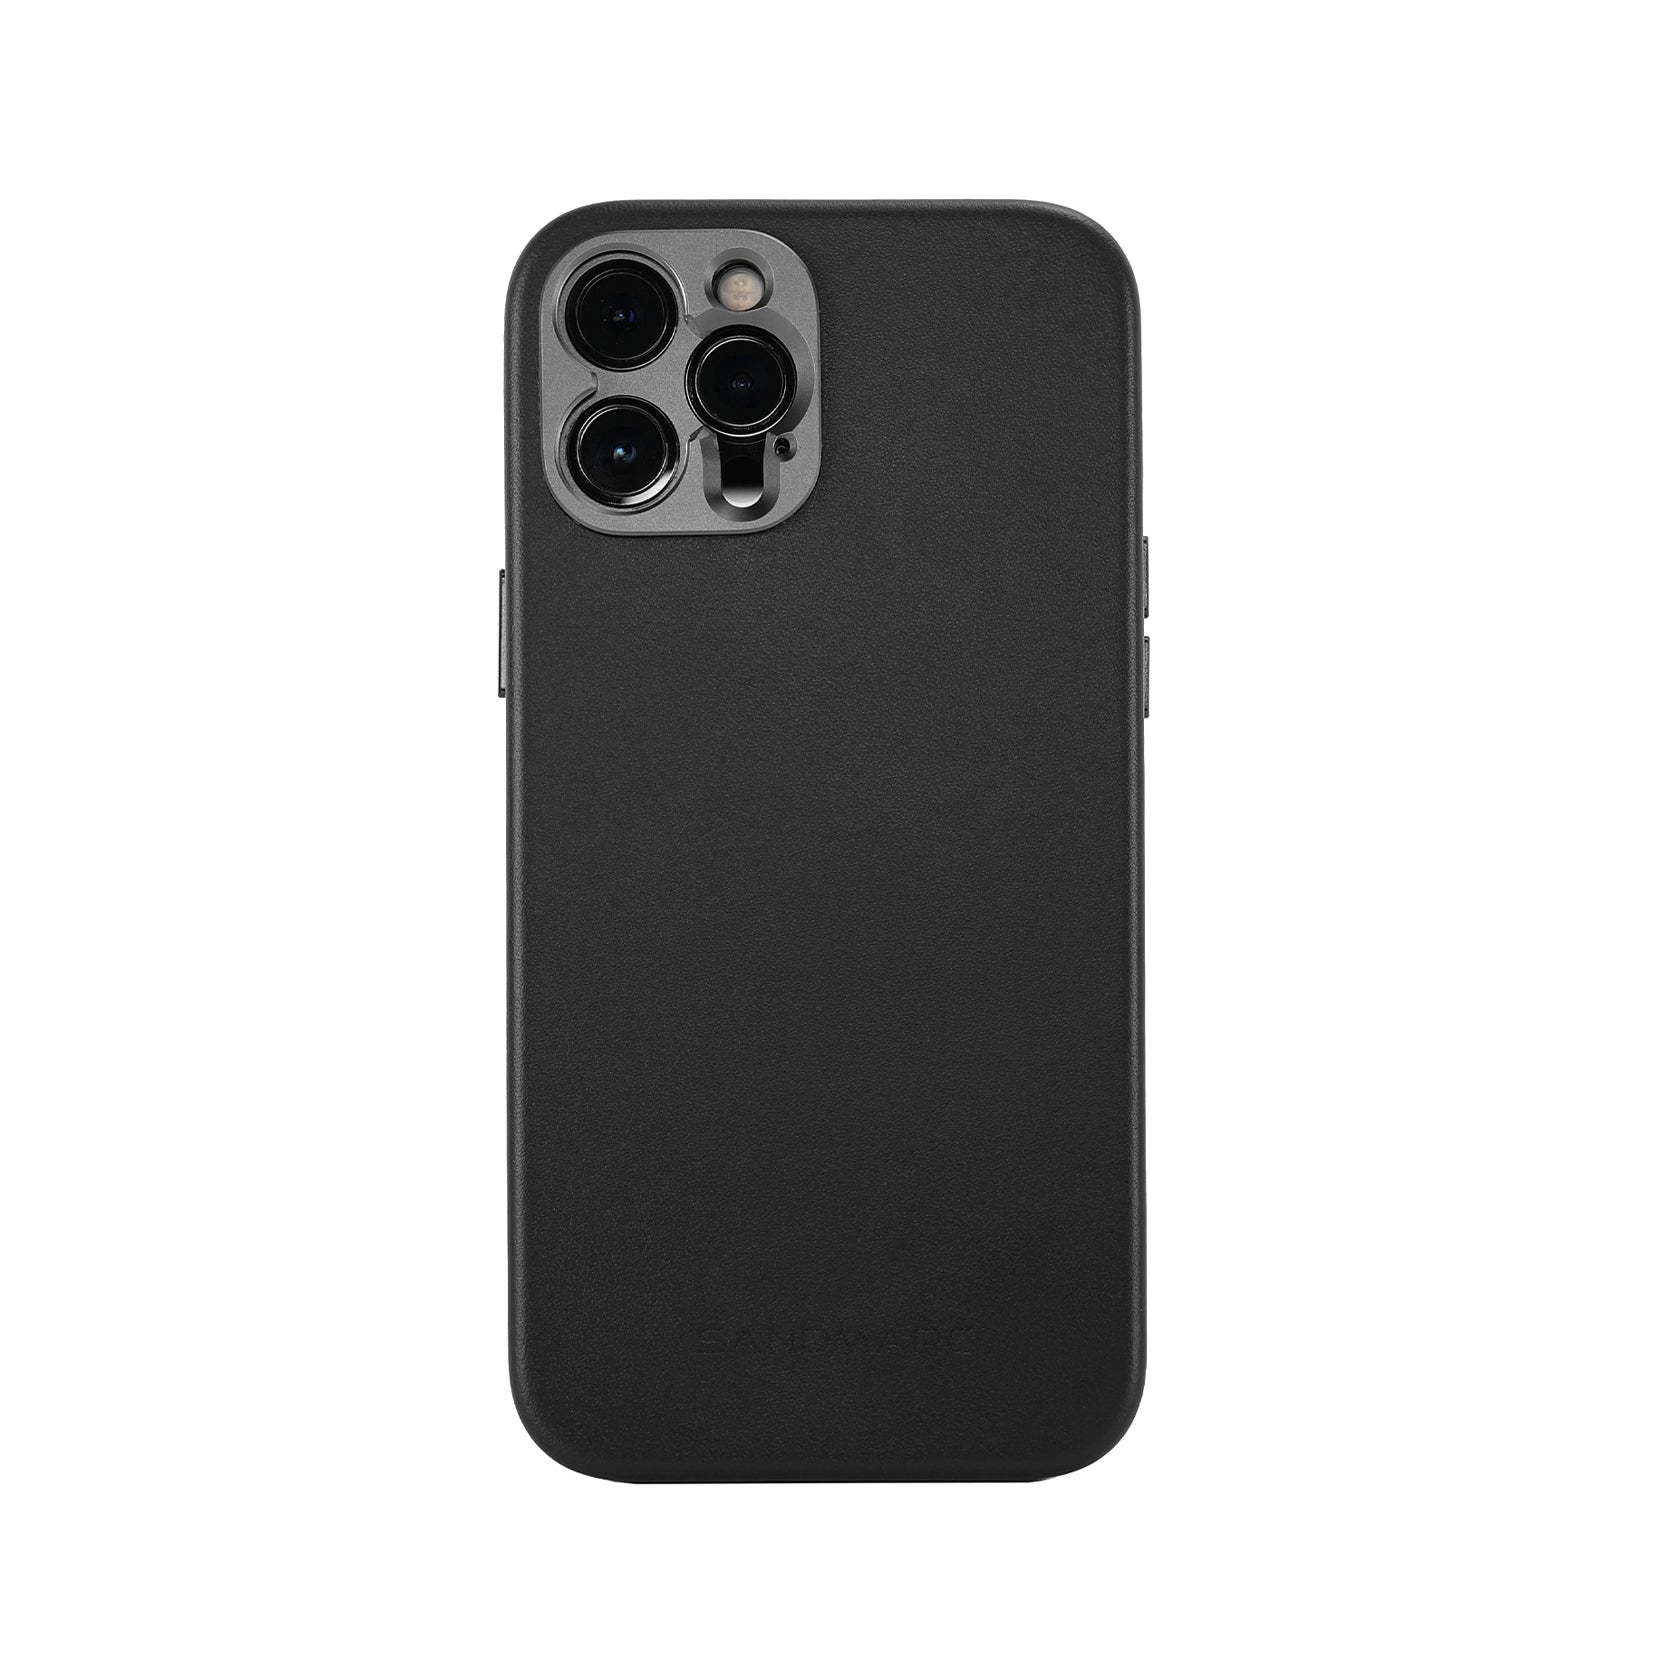 Mobile Phone Case for iPhone 12 / iPhone 12 Pro / iPhone 12 Pro